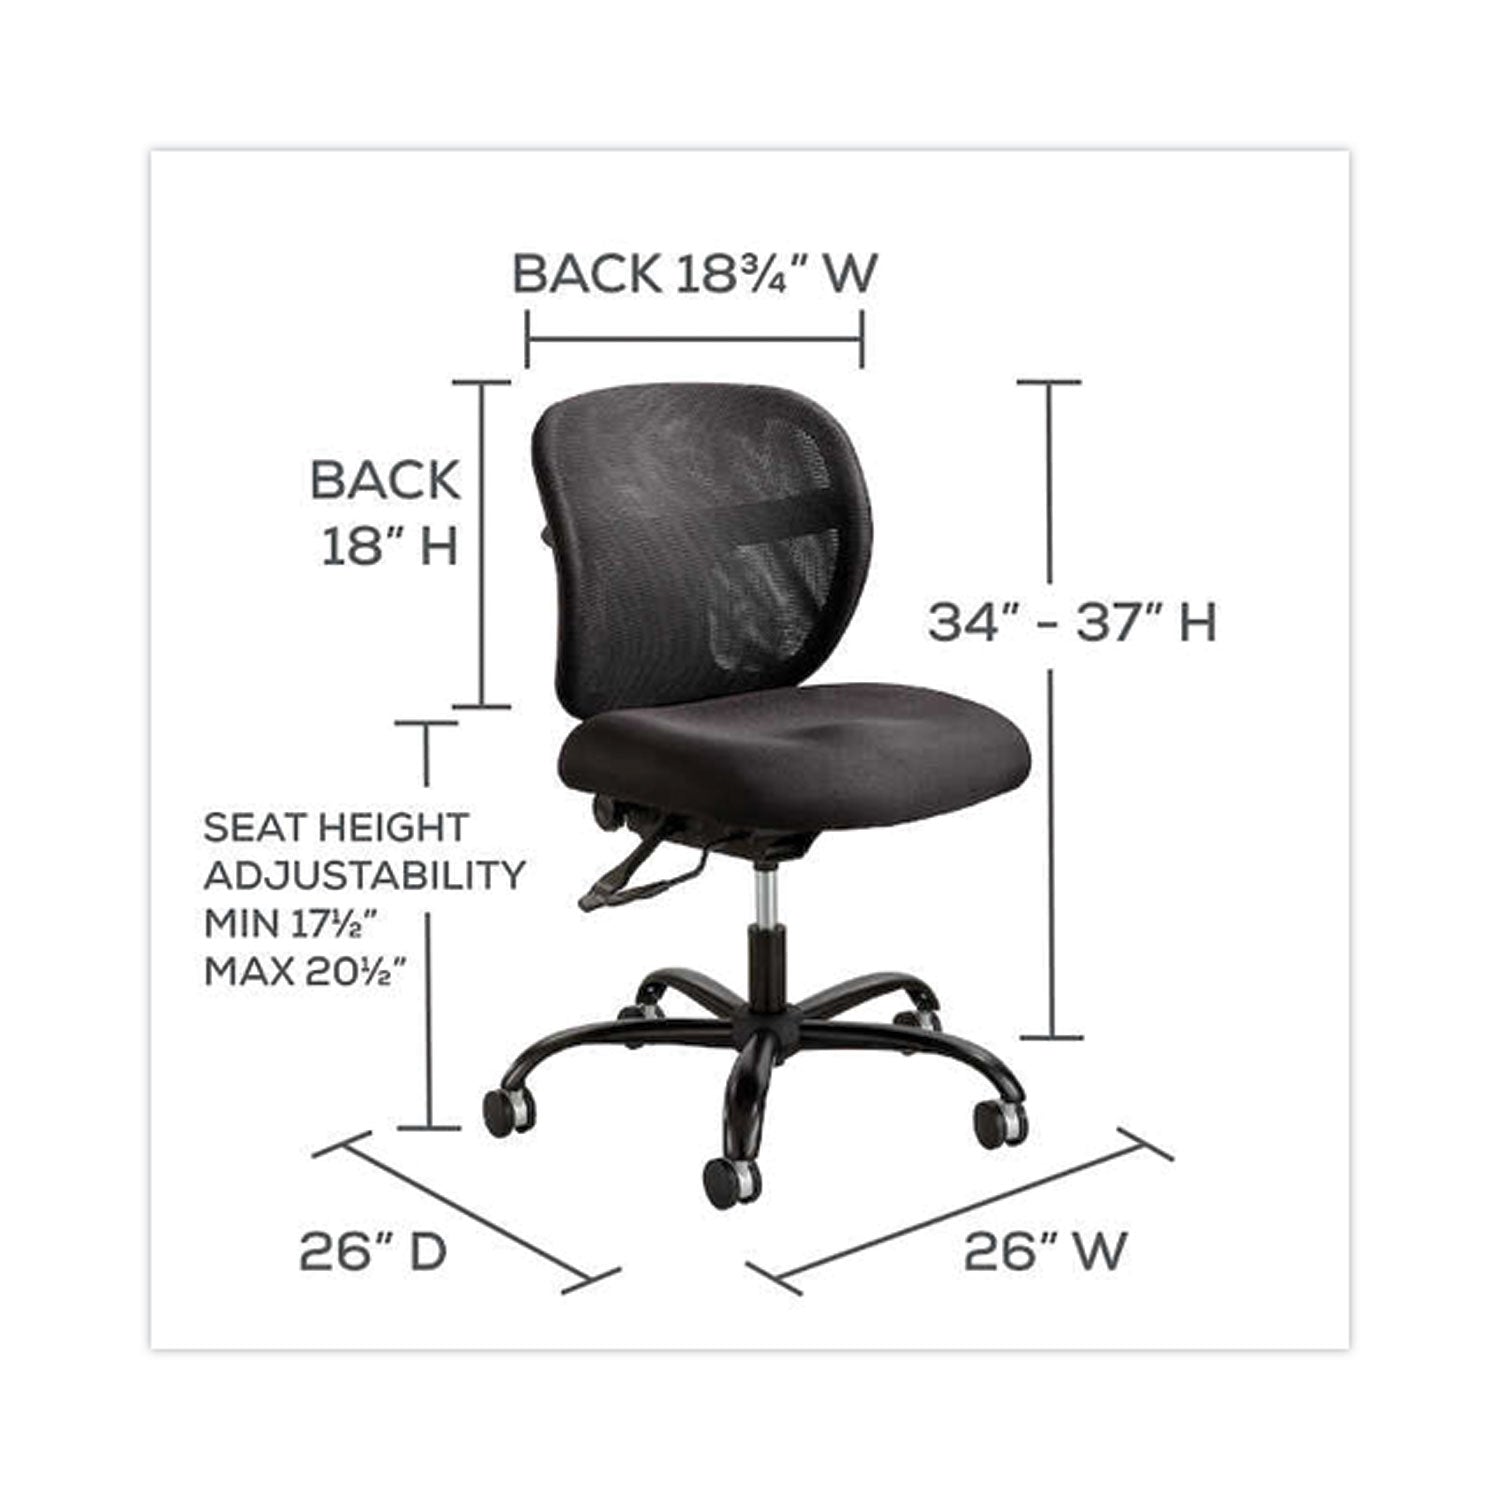 Vue Intensive-Use Mesh Task Chair, Supports Up to 500 lb, 18.5" to 21" Seat Height, Black Vinyl Seat/Back, Black Base - 